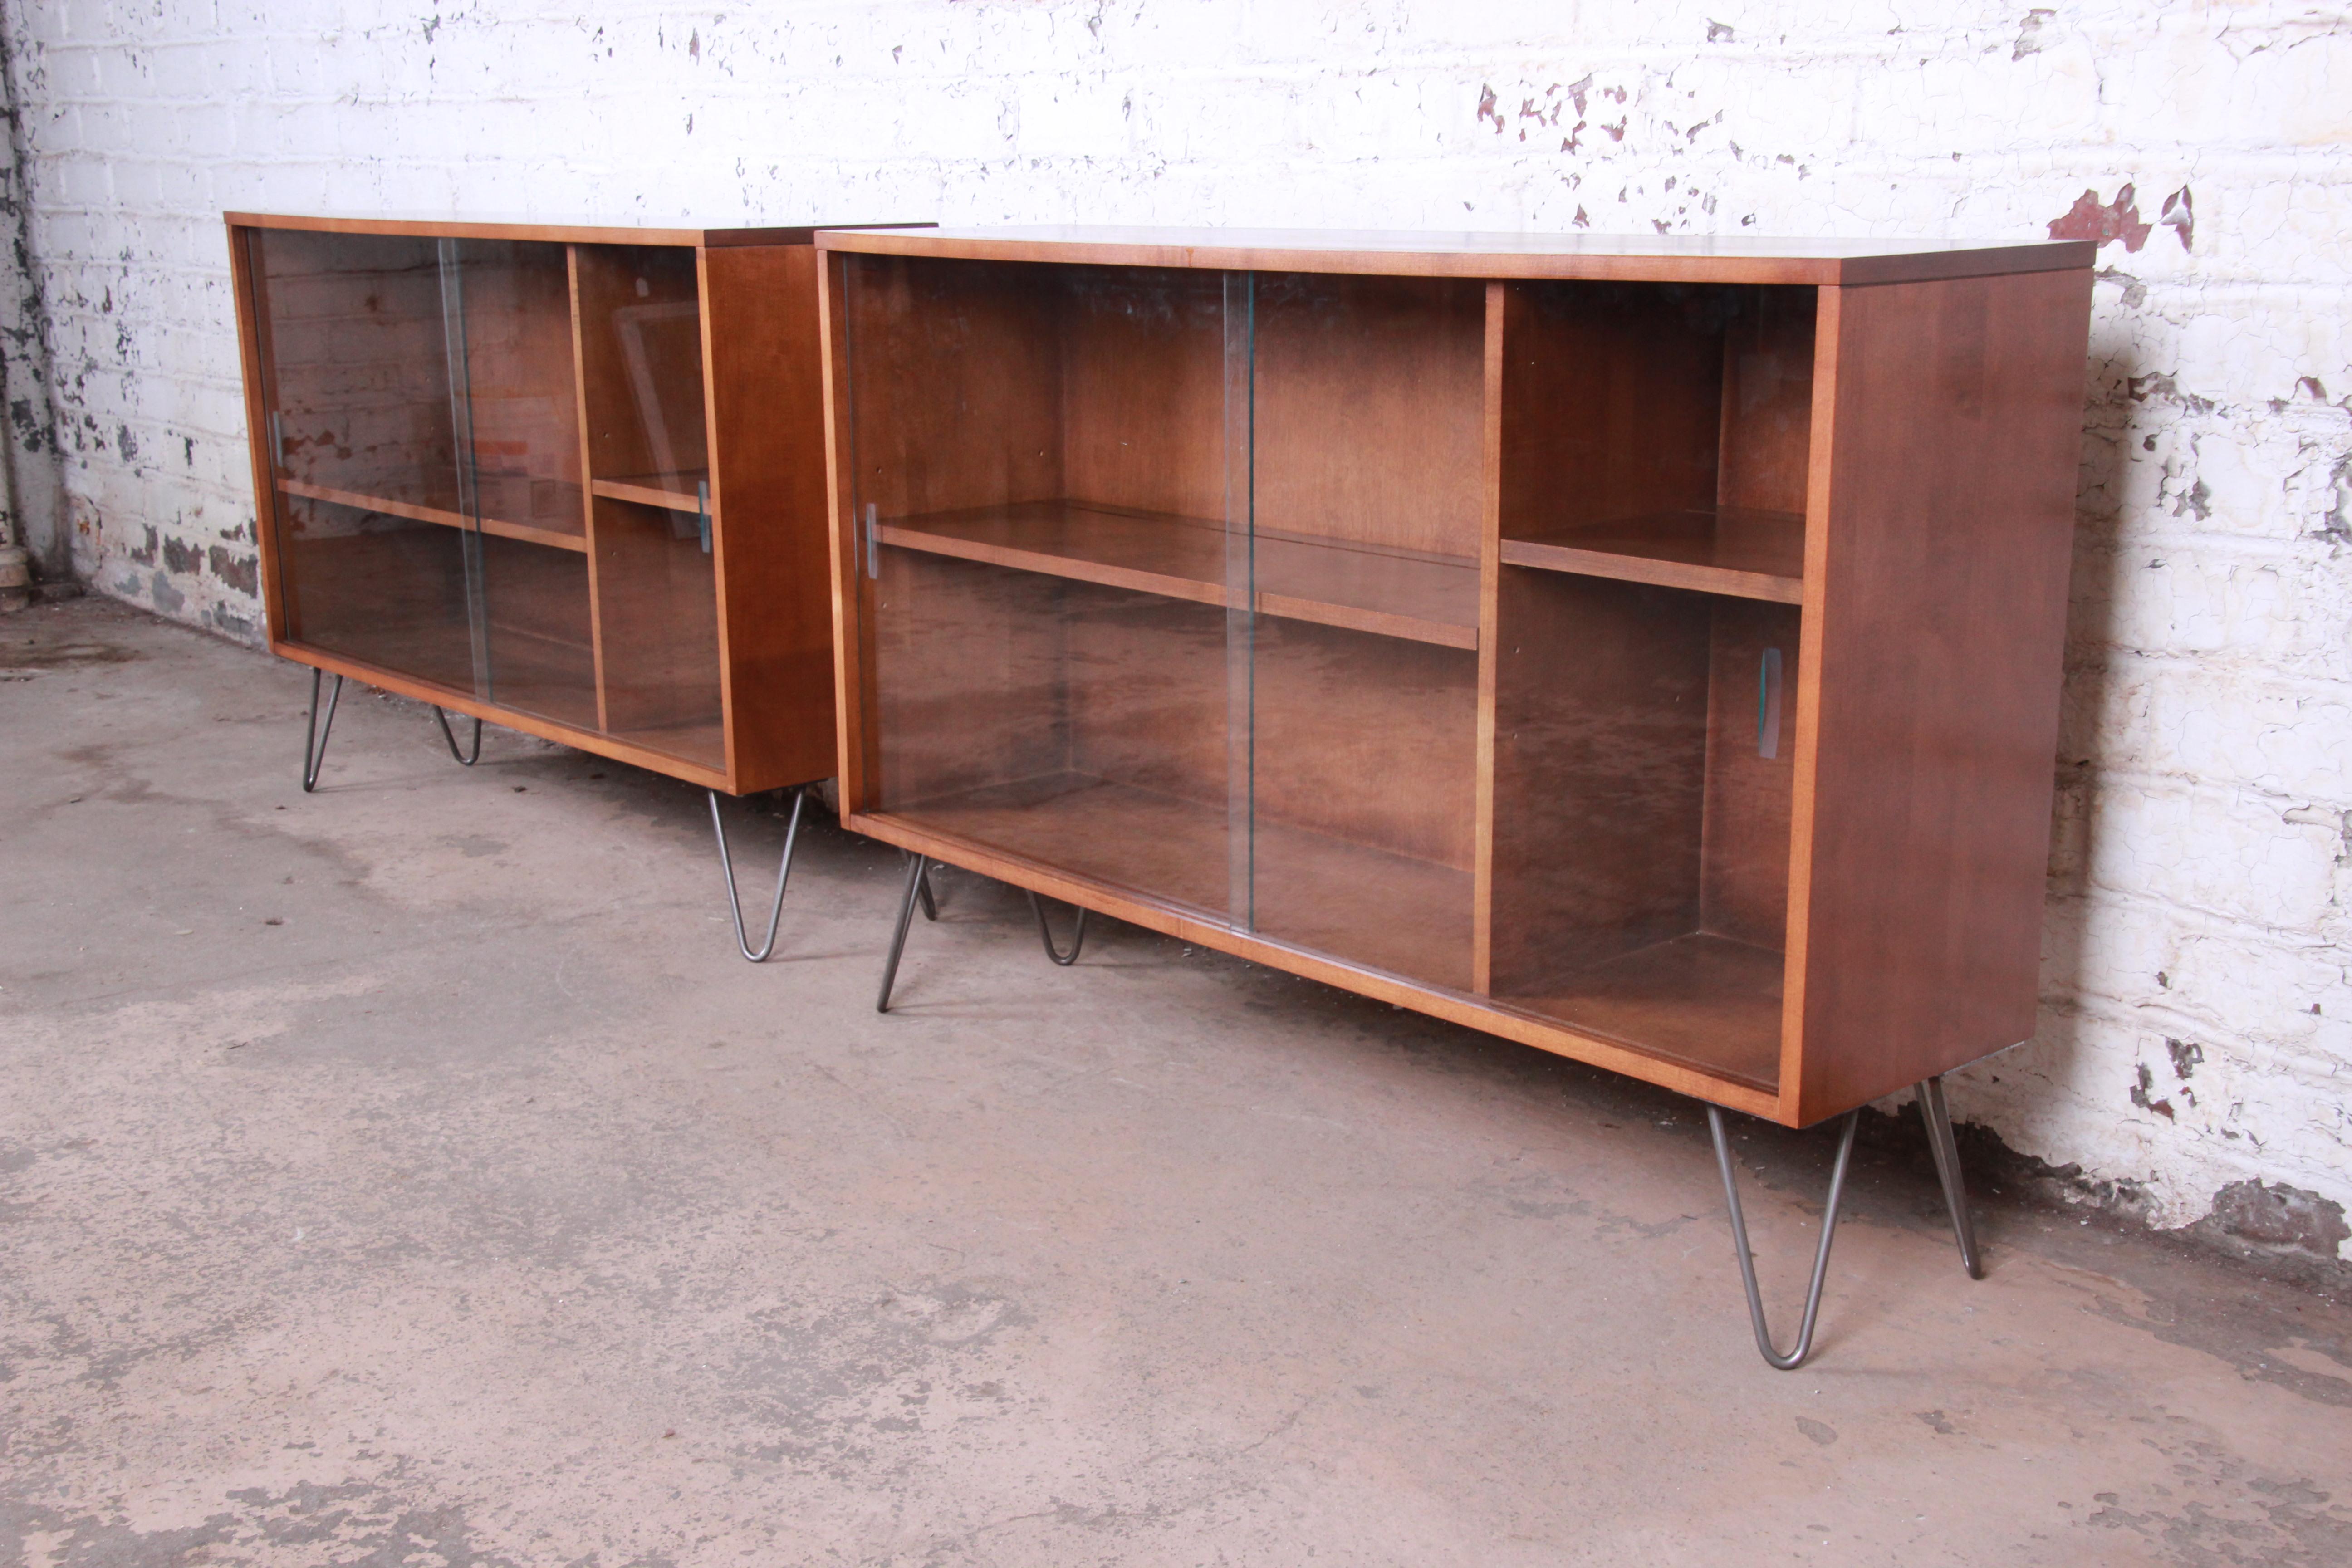 A sleek and stylish pair of Mid-Century Modern glass front credenzas or bookcases

Designed by Paul McCobb for Winchendon Furniture 